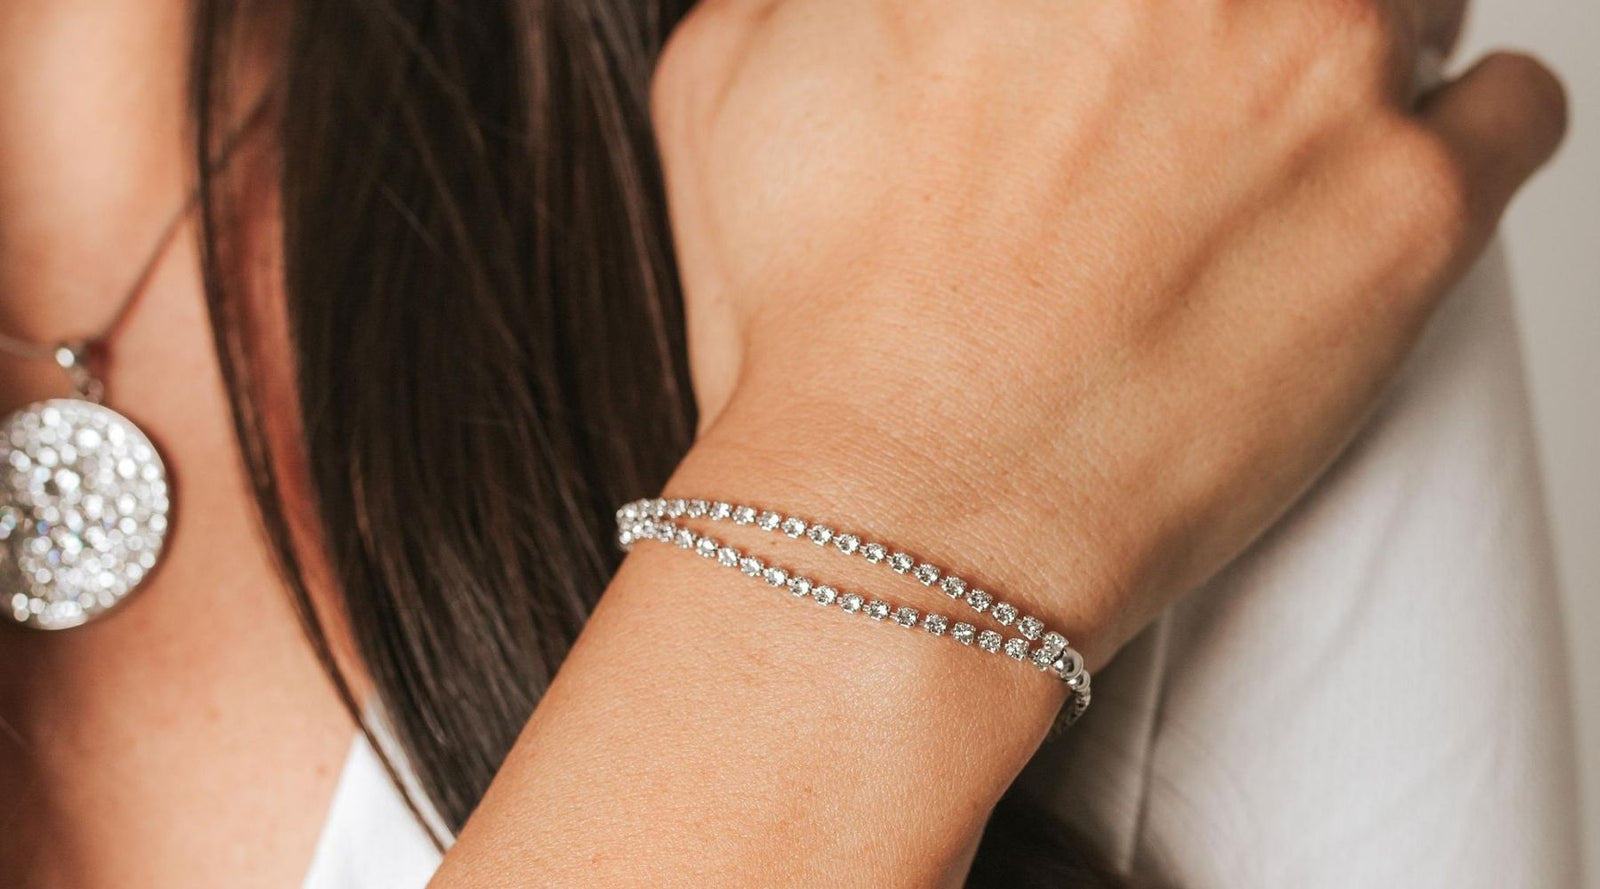 8 Tips for Matching Your Bracelet with Any Outfit